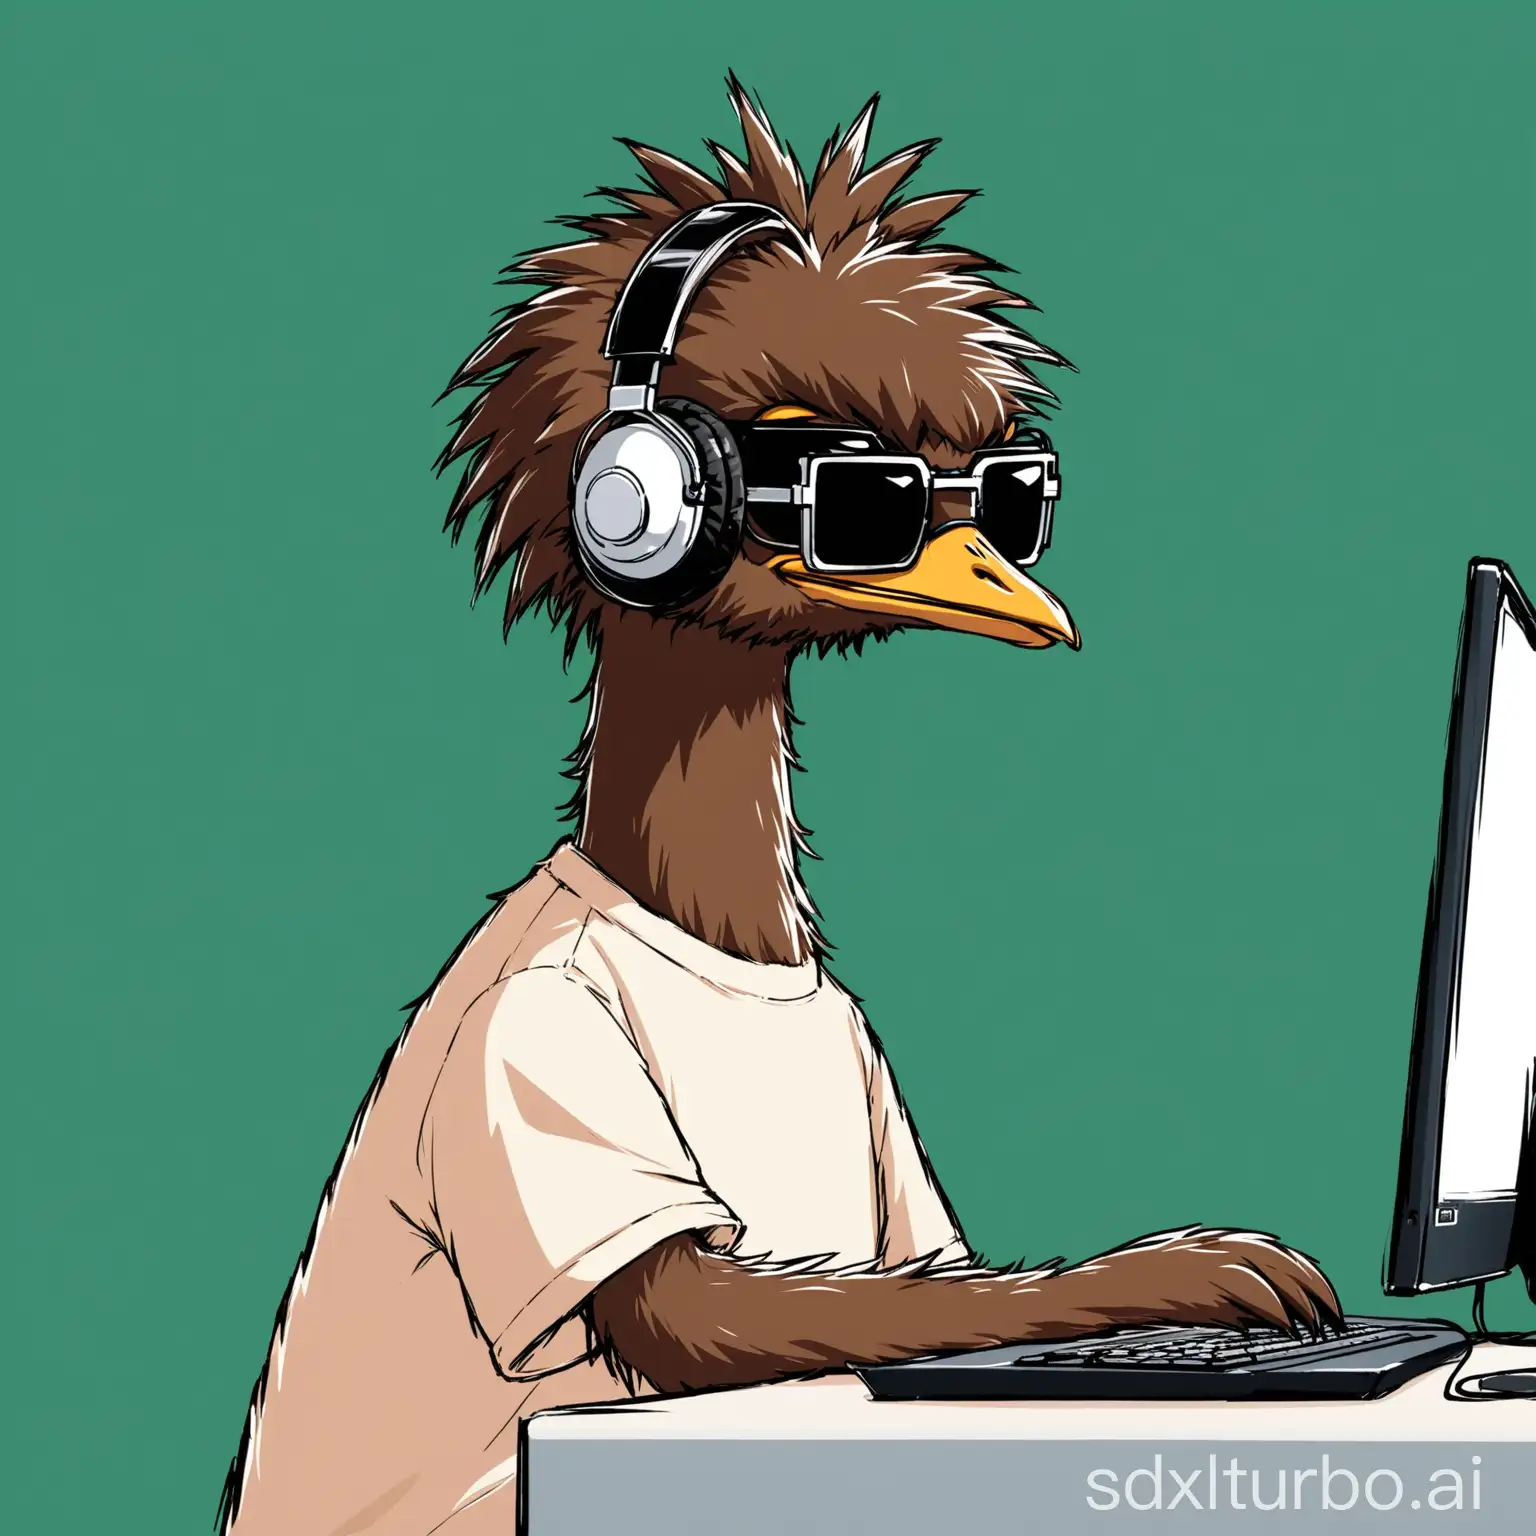 Techno-Emu-DJ-with-Sunglasses-and-Headphones-Mixing-on-Computer